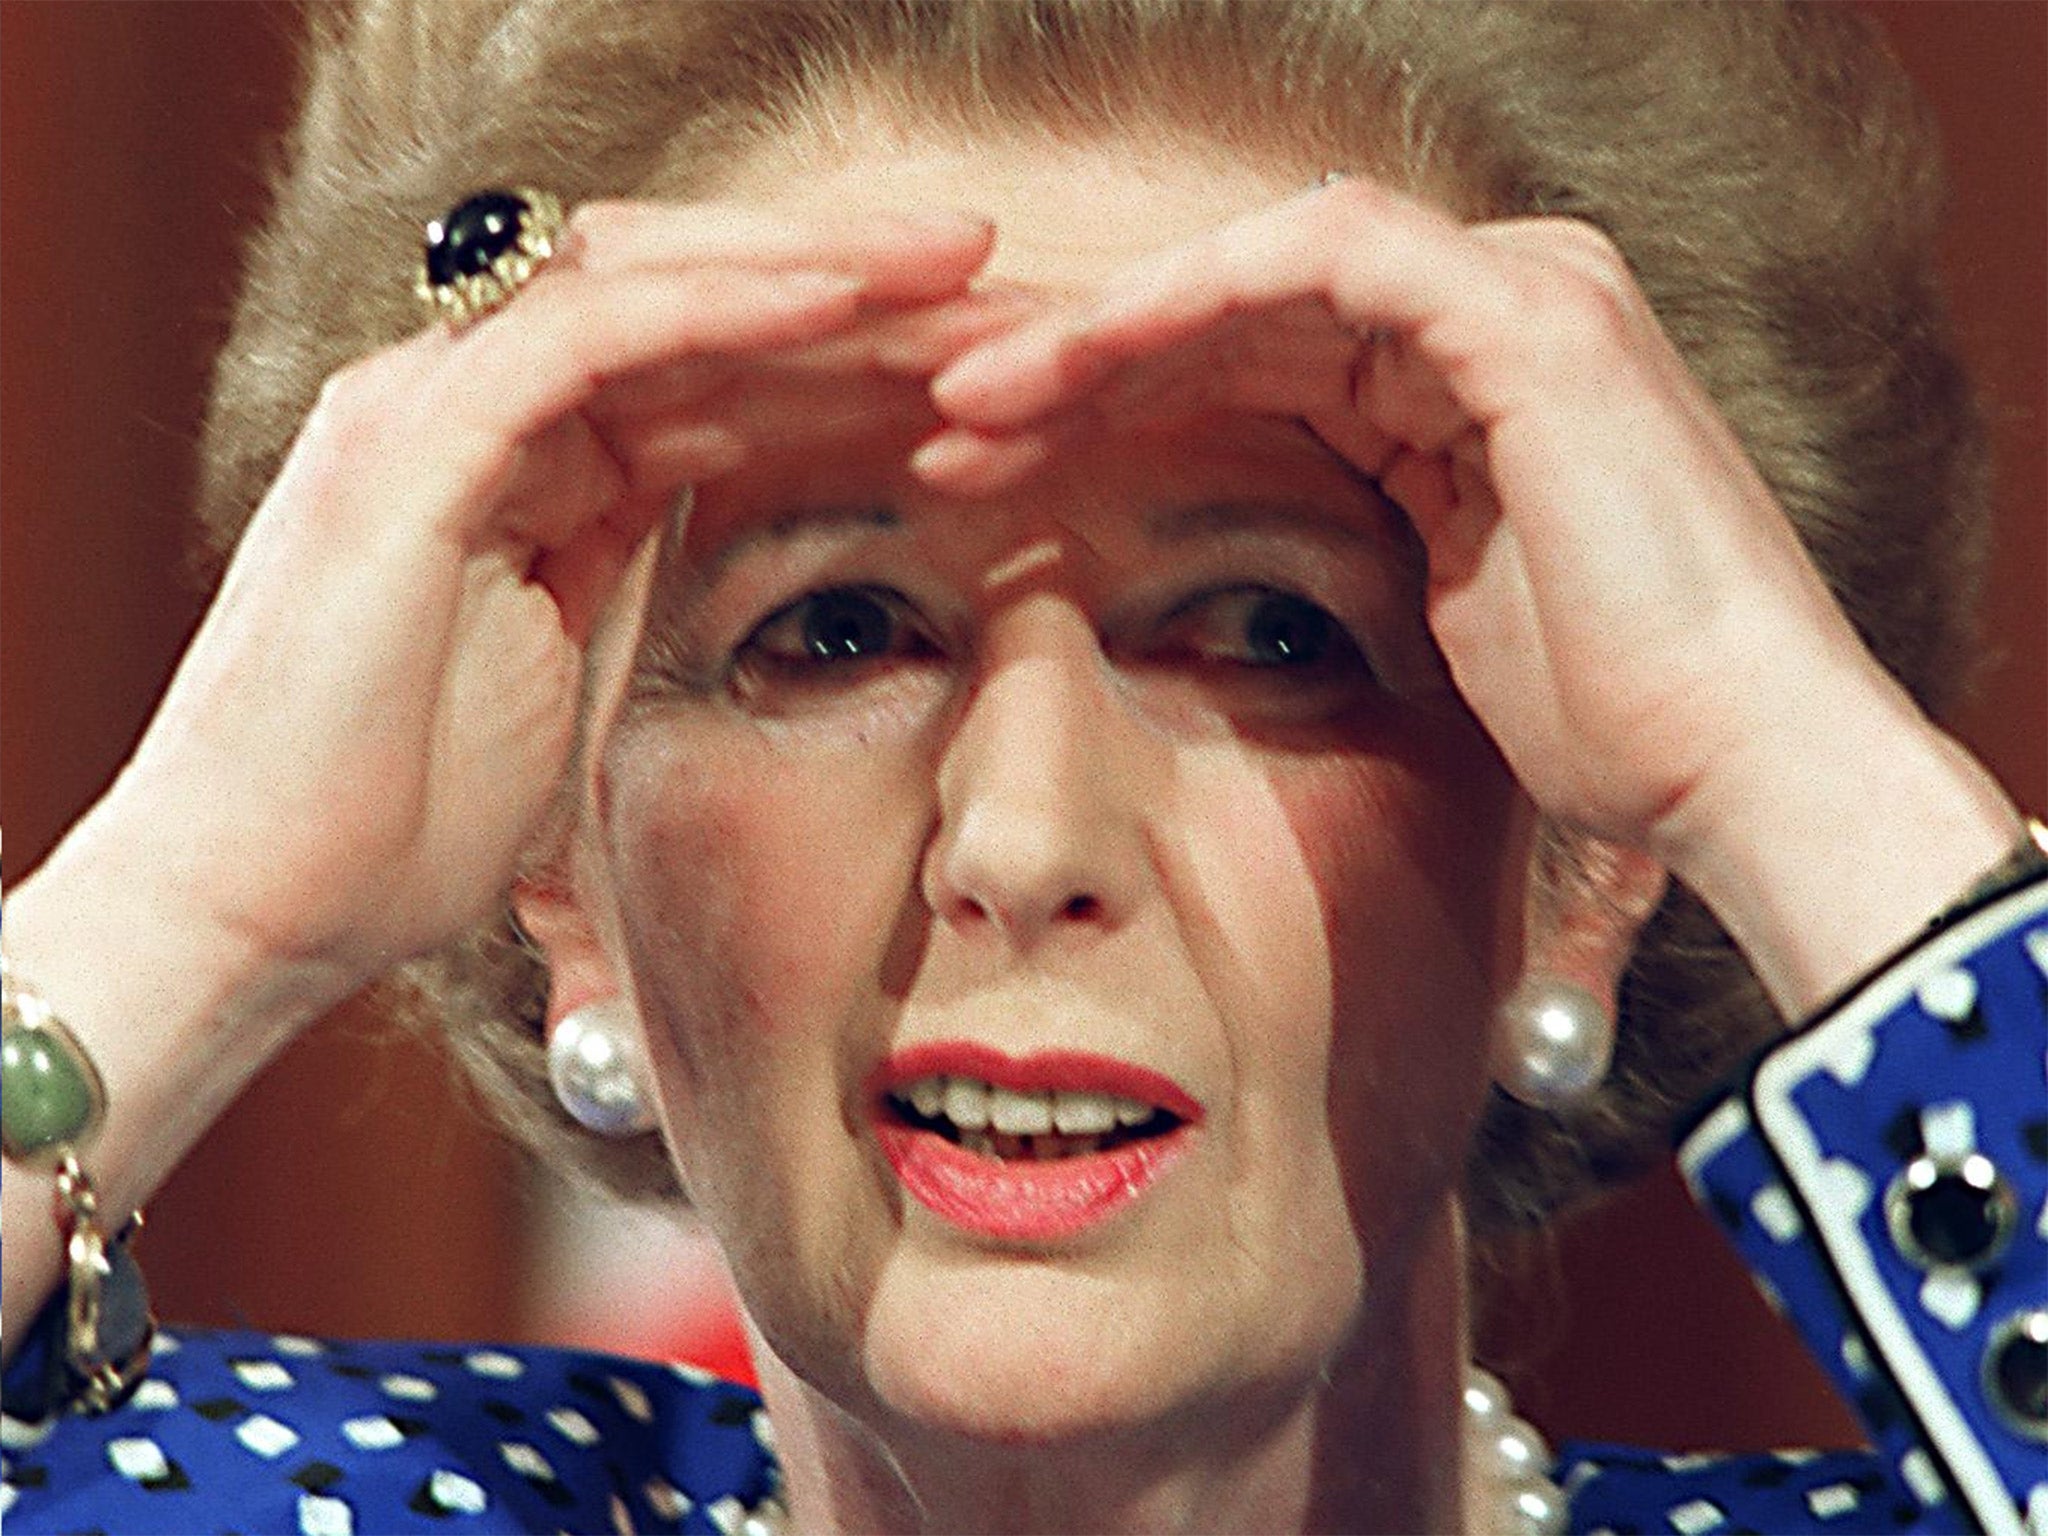 In 1989, Thatcher said she would fight one more term